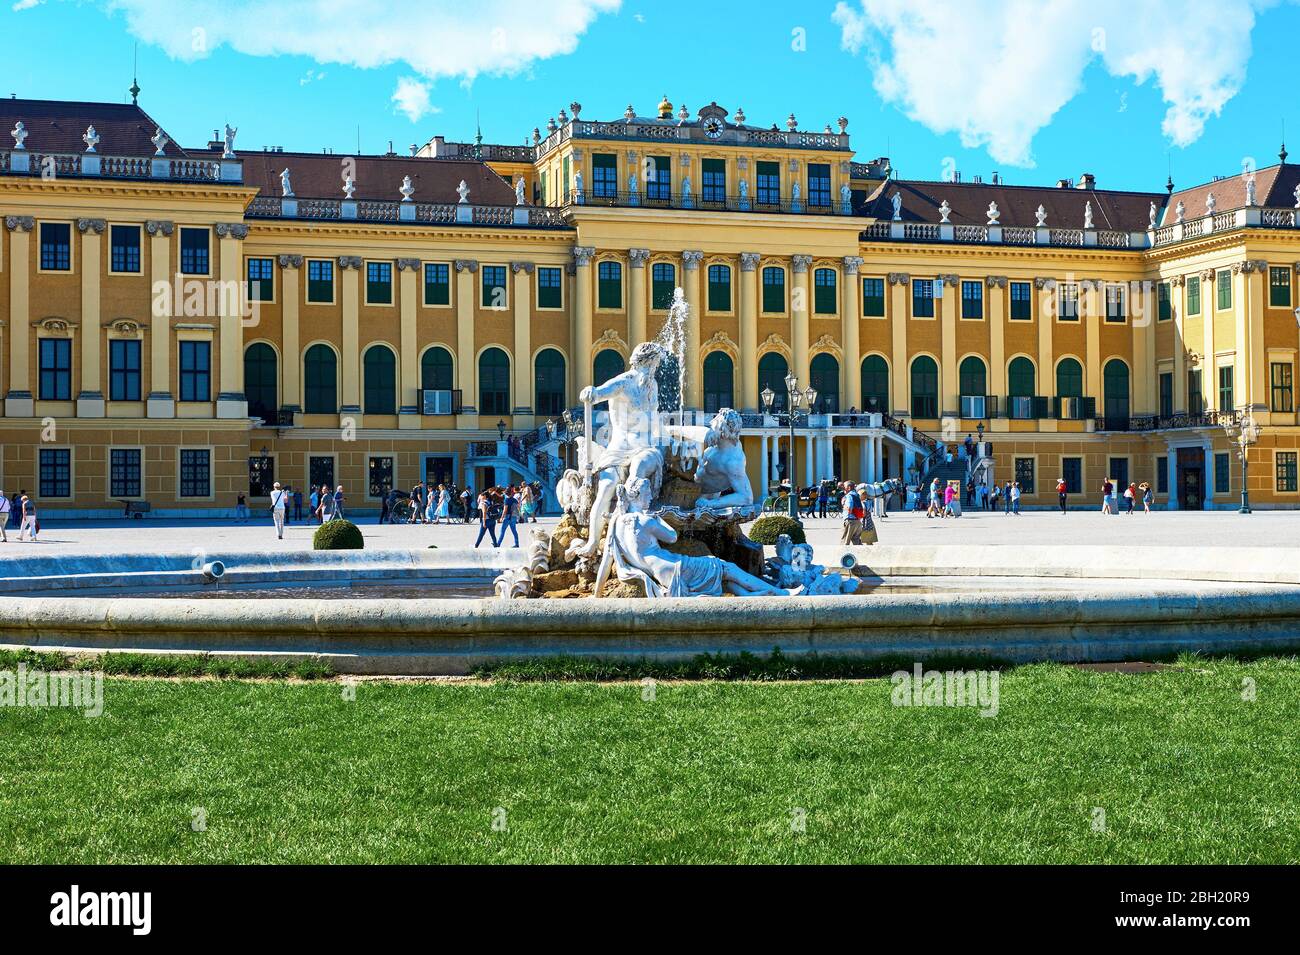 Visiting Schonbrunn palace in Vienna Stock Photo